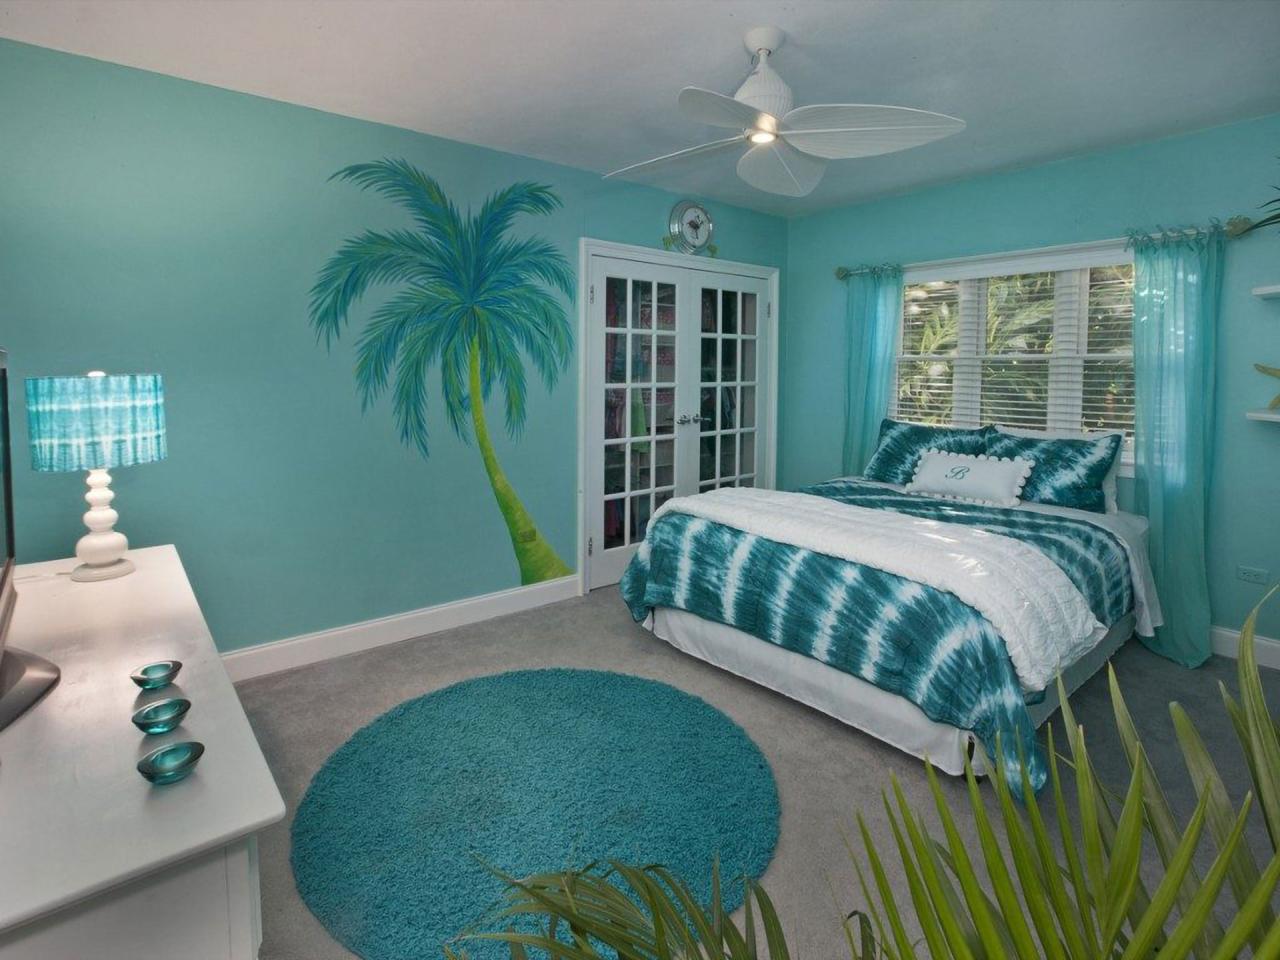 Beach bedroom themed blue bedrooms ceilings house painted interior style decor ceiling away take soft